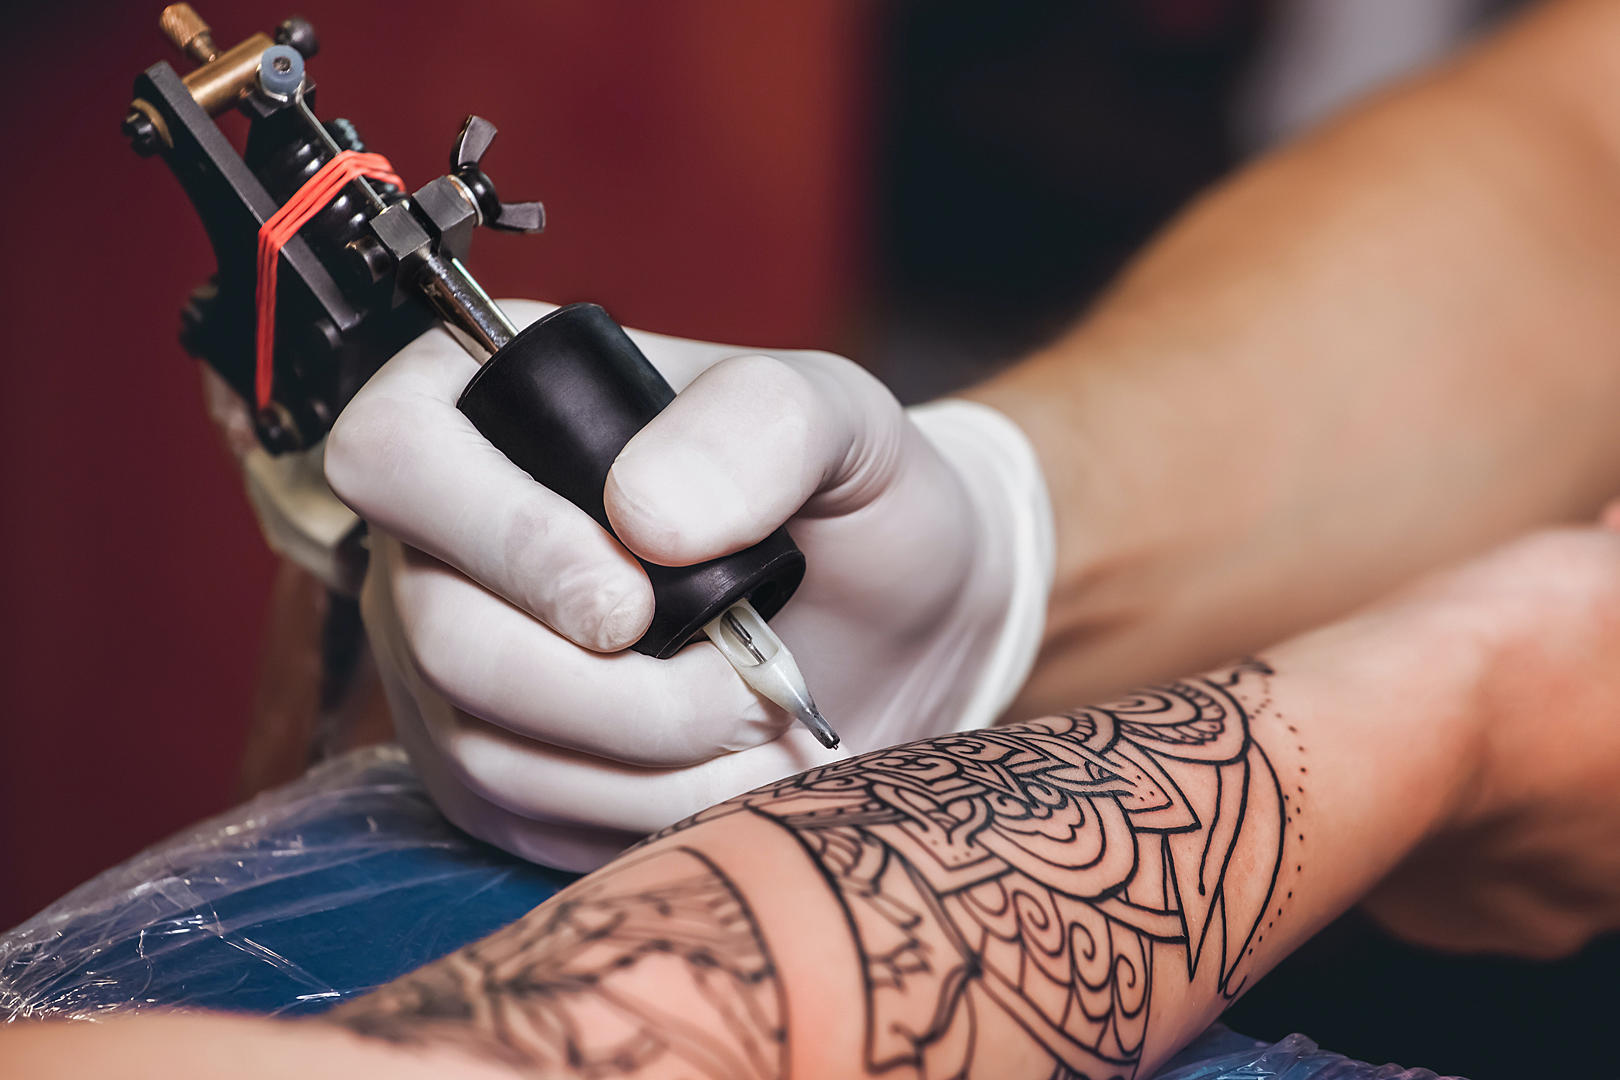 How To Rock Henna Temporary Tattoos For a New Look